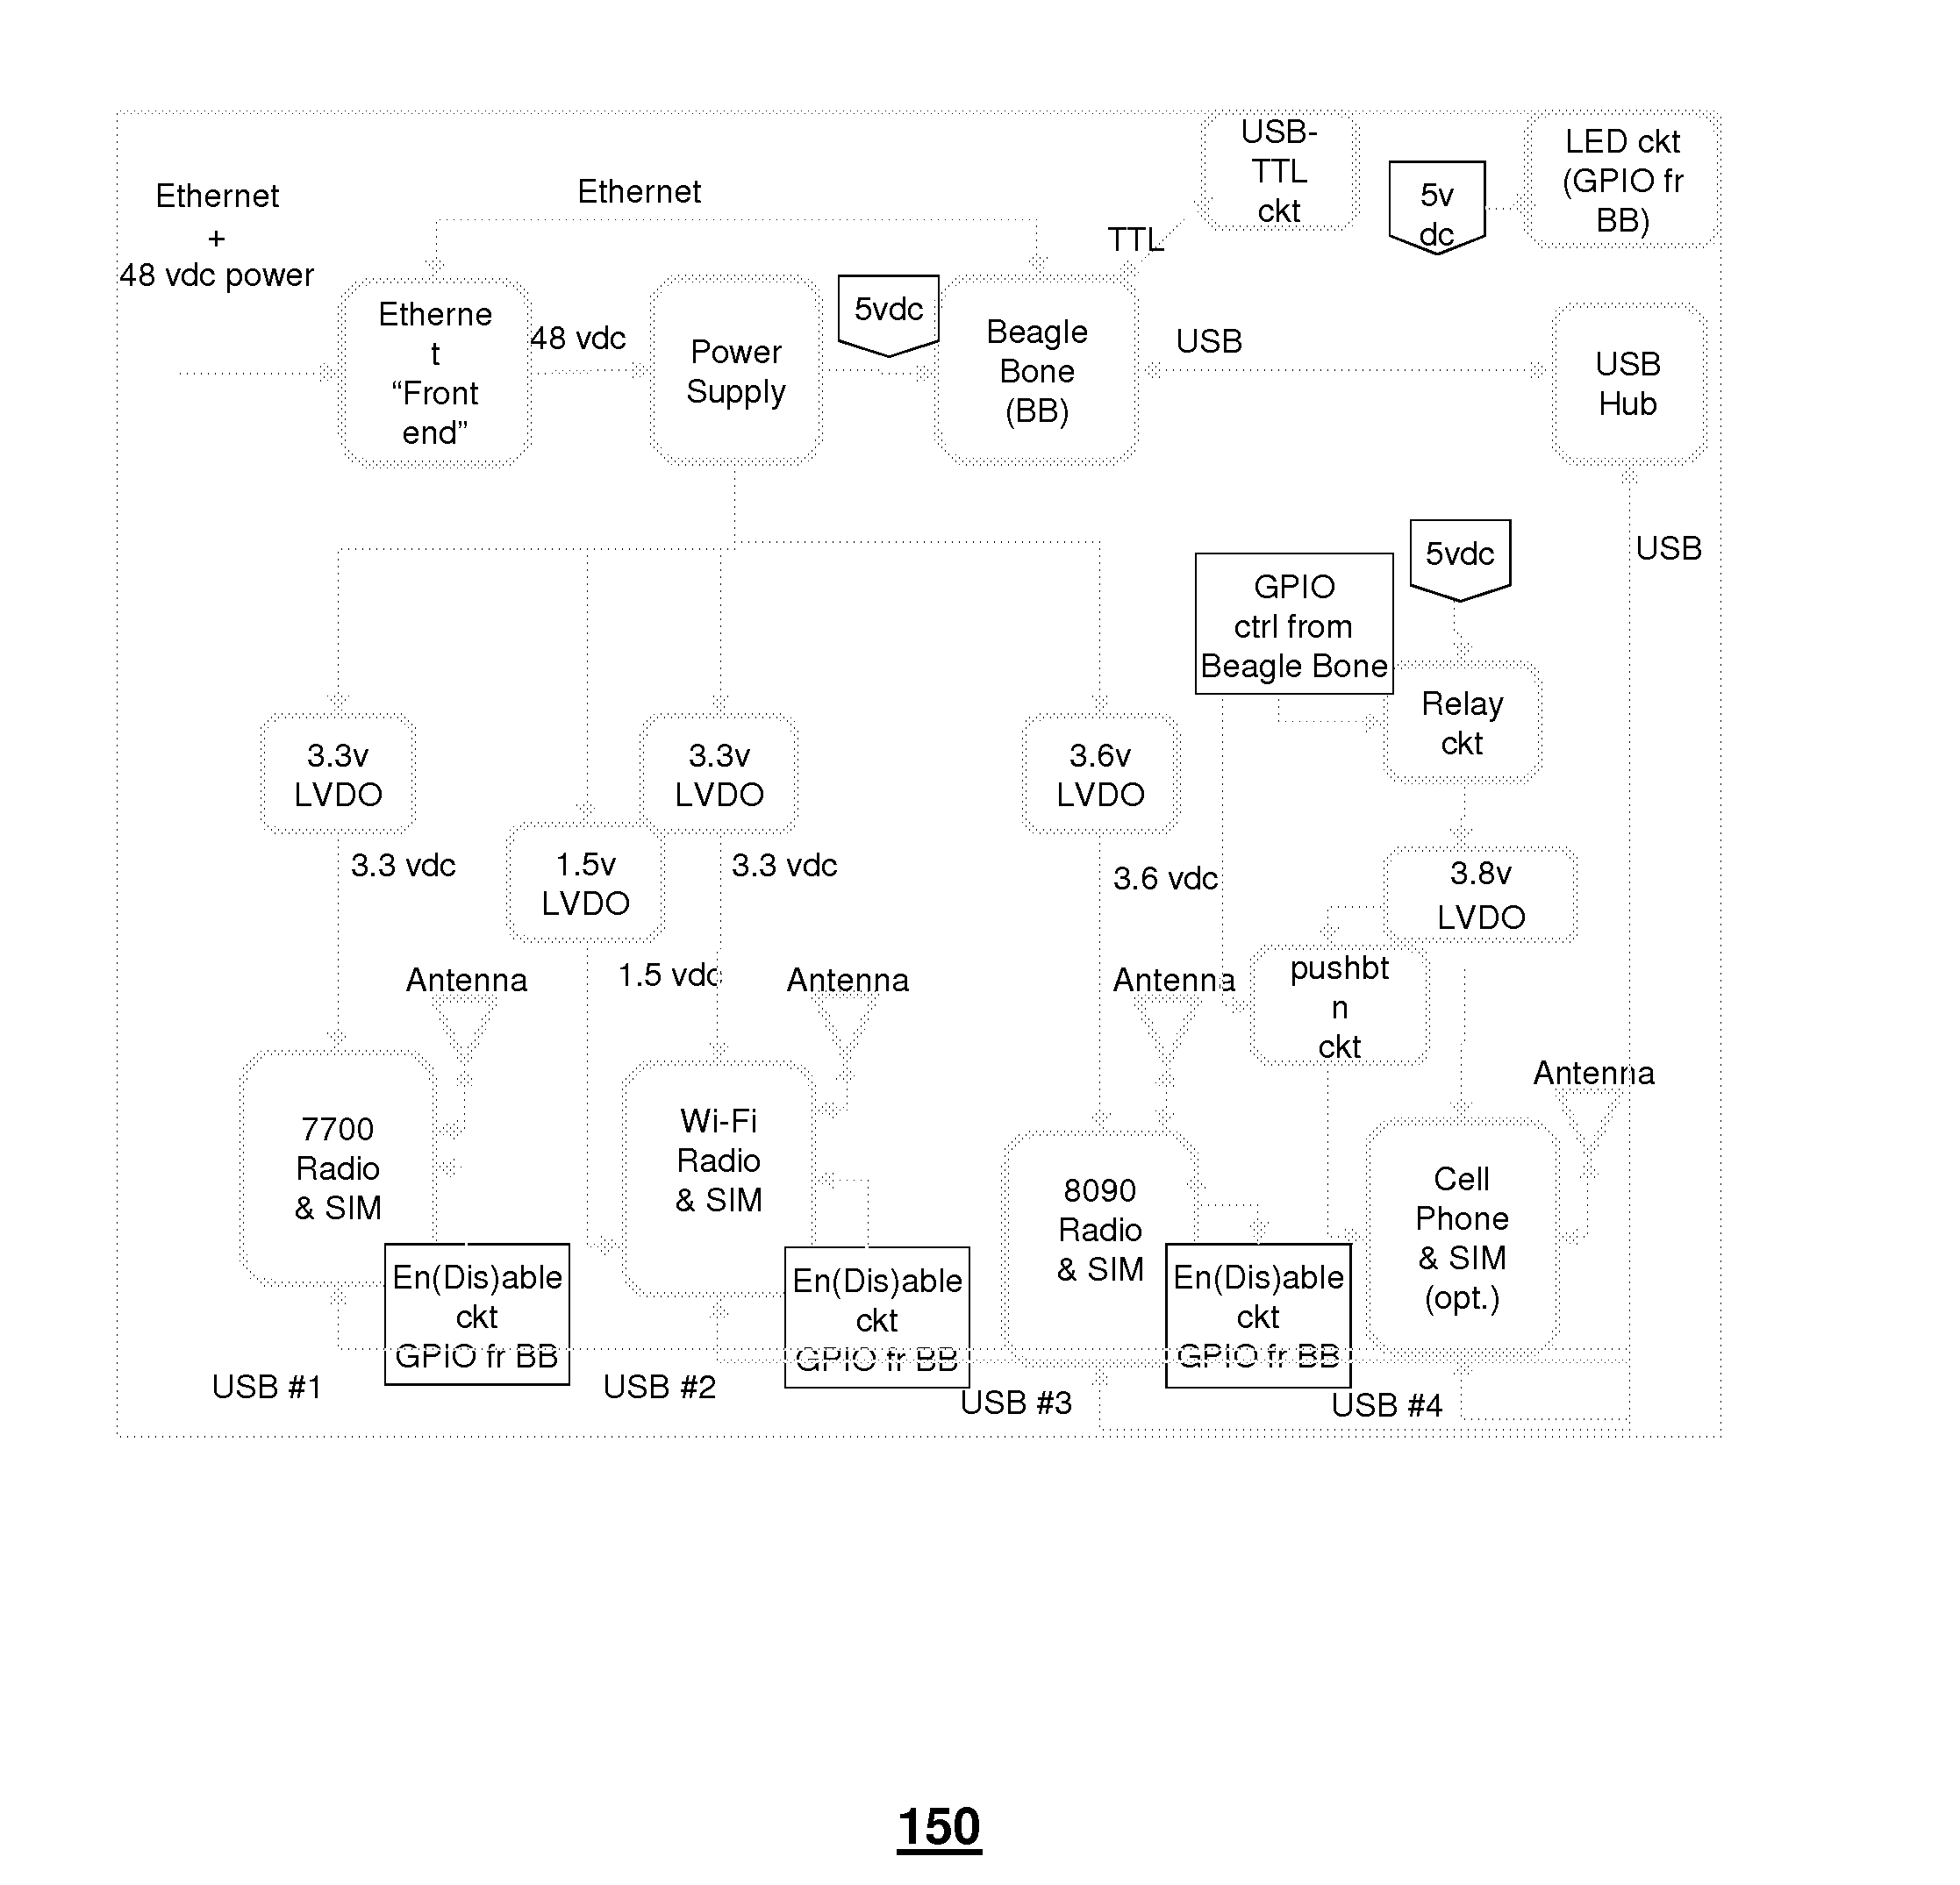 Method and apparatus for managing wireless probe devices